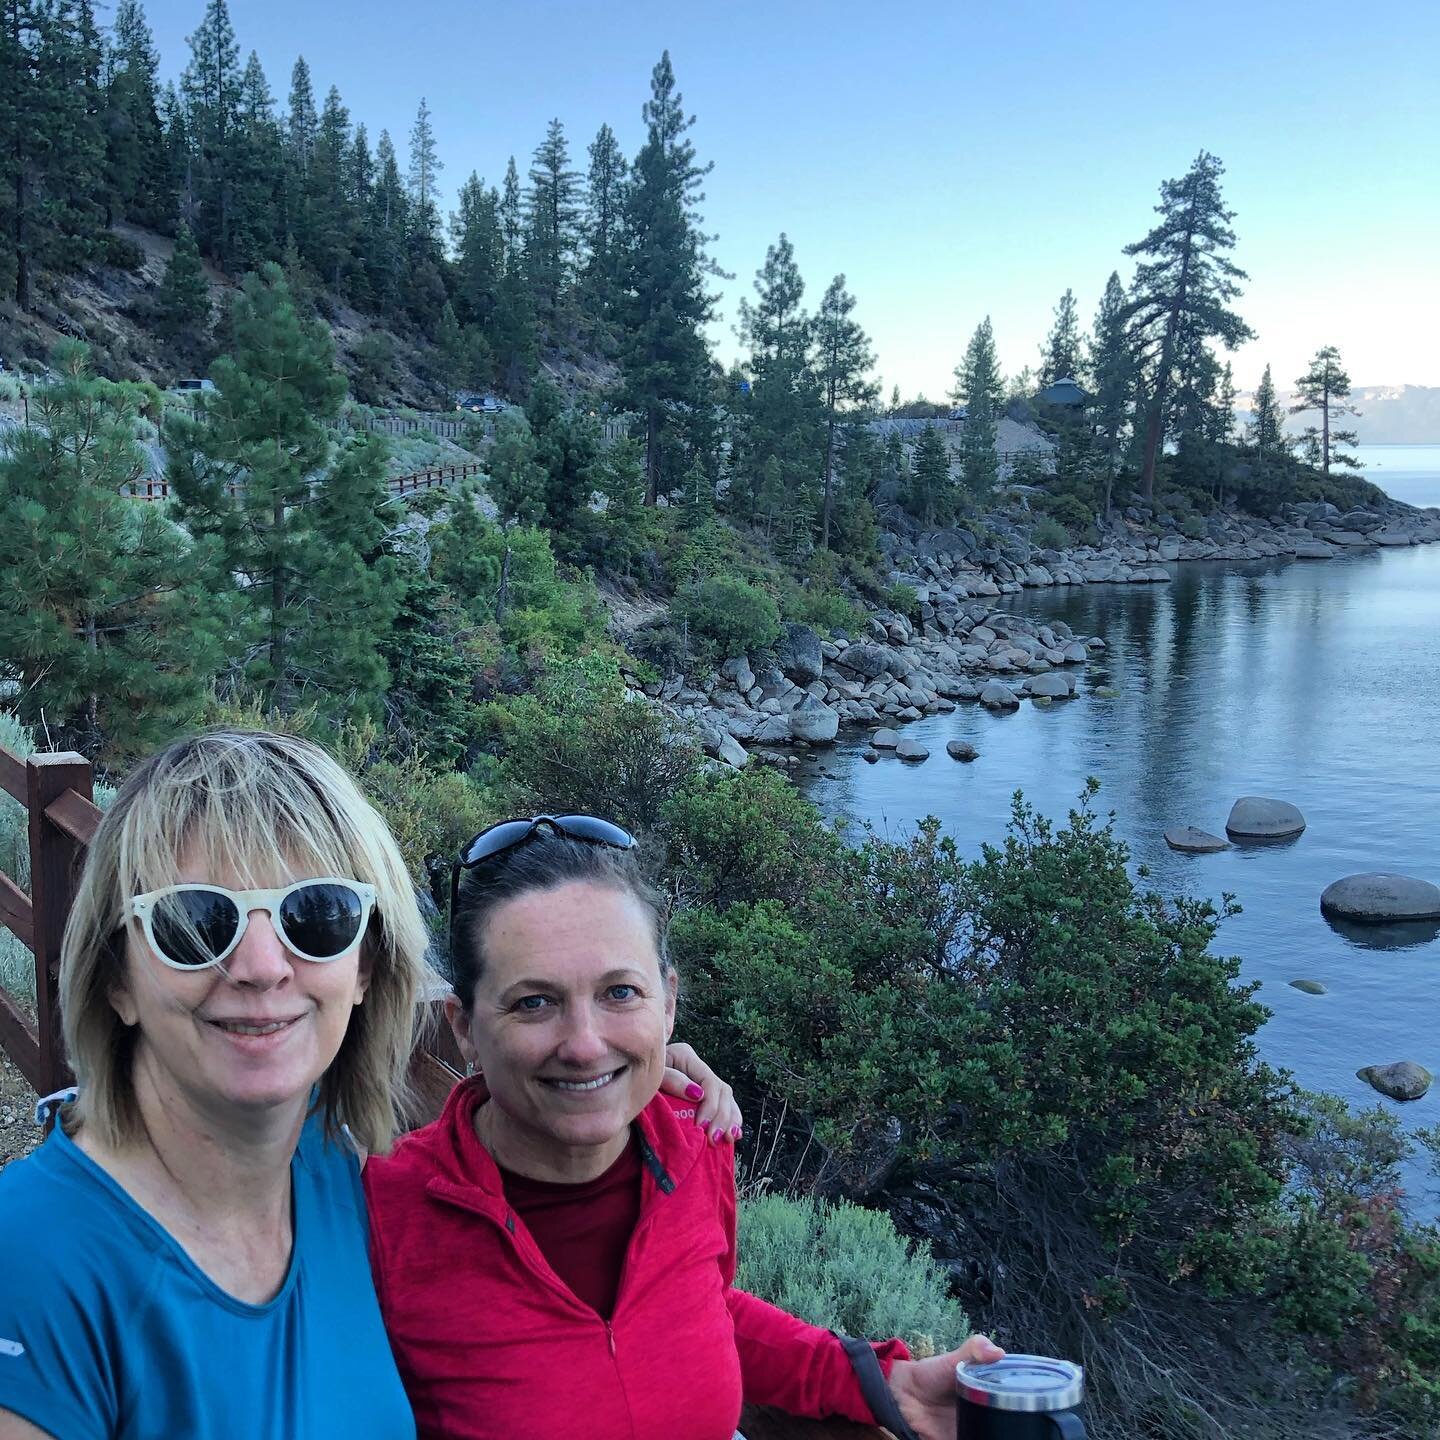 Good morning Lake Tahoe, our work-from-home headquarters for the next two or so weeks. Great being here and reuniting with old friends.
.
.
.
#laketahoe #lakedreaming #nevada #visitreno #sierramountains